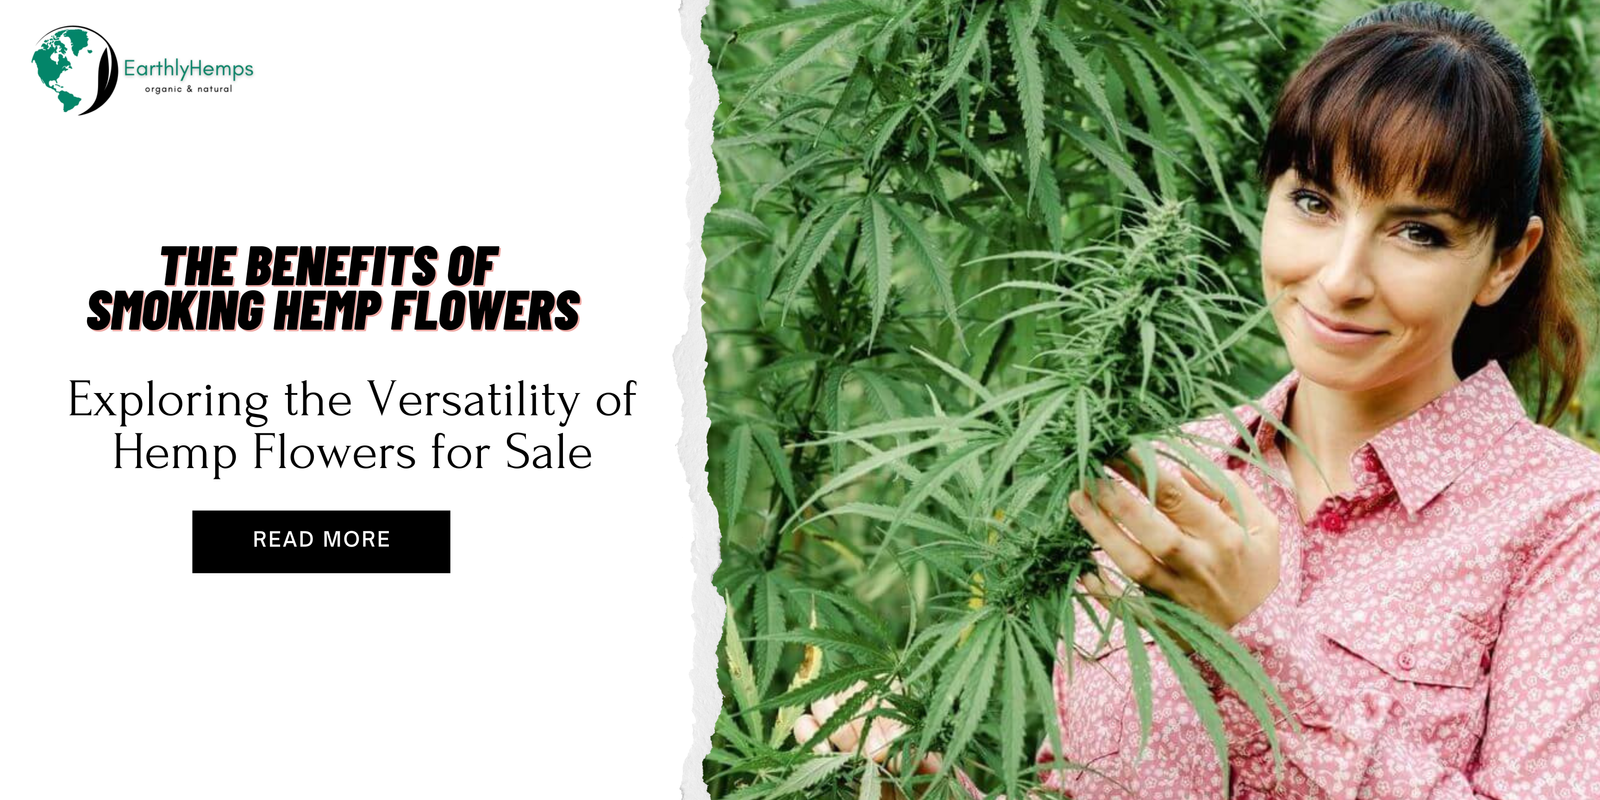 You are currently viewing The Benefits of Smoking Hemp Flowers: Exploring the Versatility of Hemp Flowers for Sale